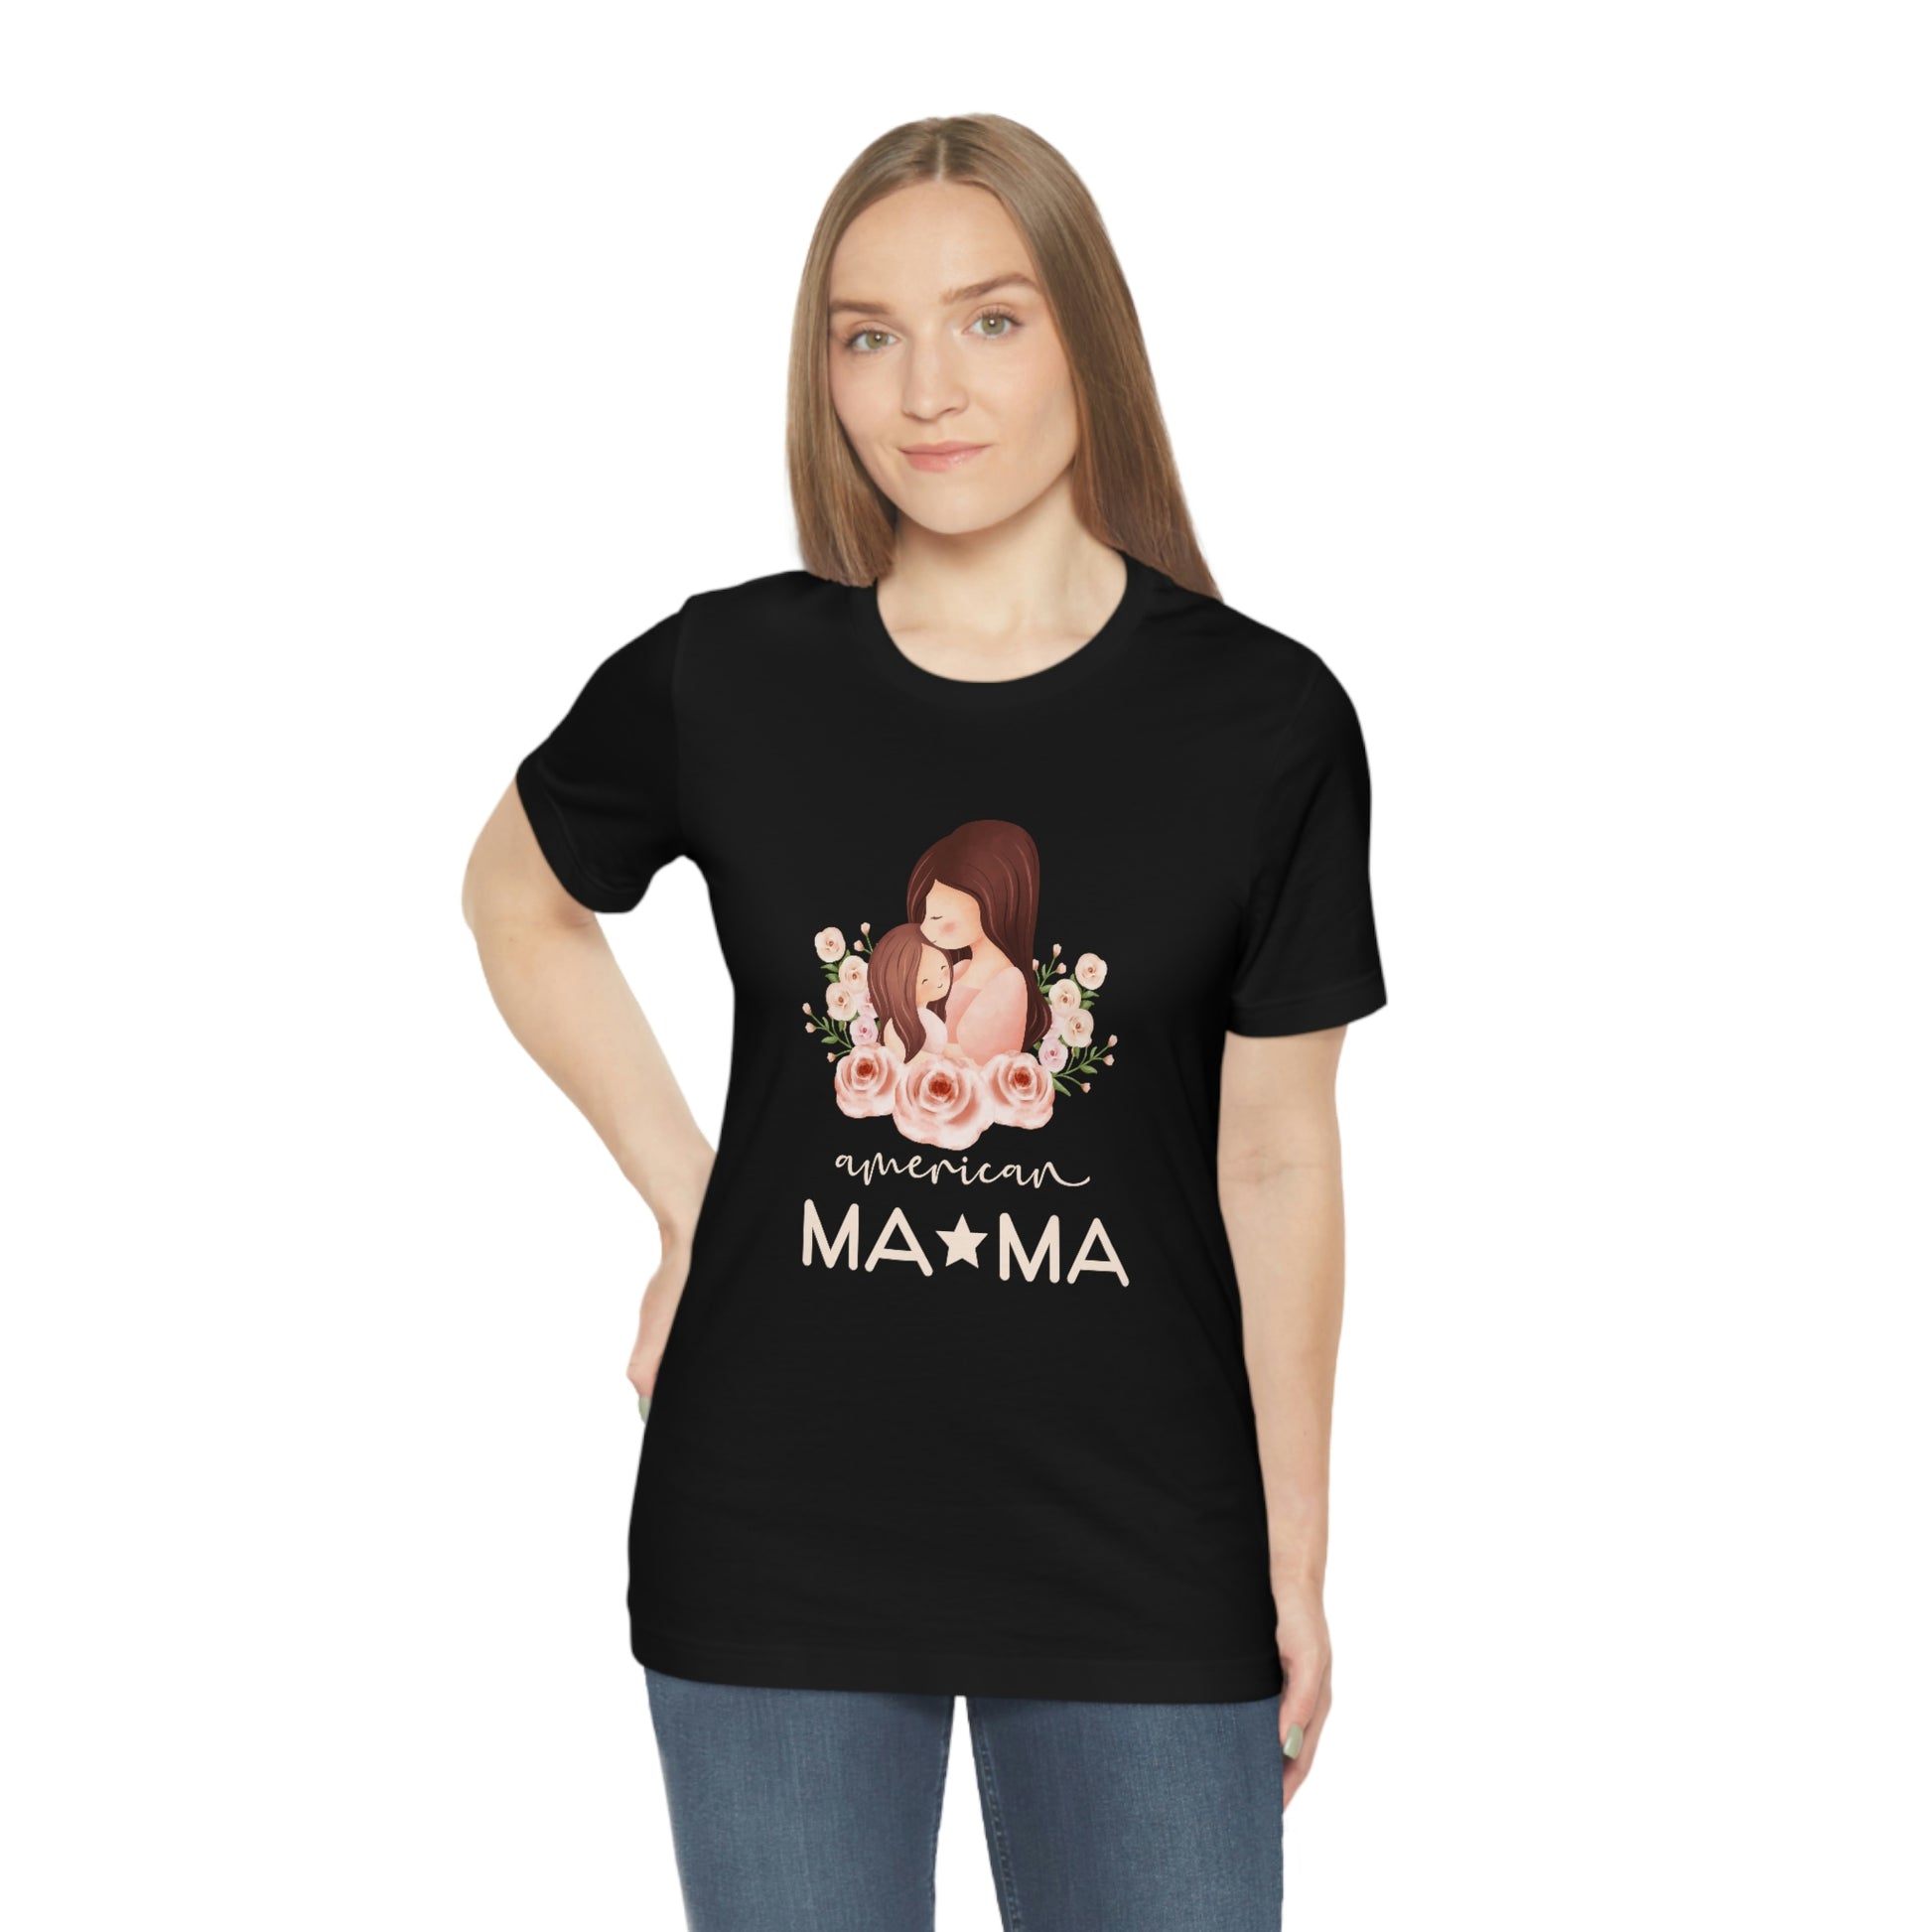 Get ready to make a statement with our American Mom black jersey short sleeve t-shirt. A perfect Mother's Day gift for any mom. Celebrate her with this unique and stylish t-shirt.